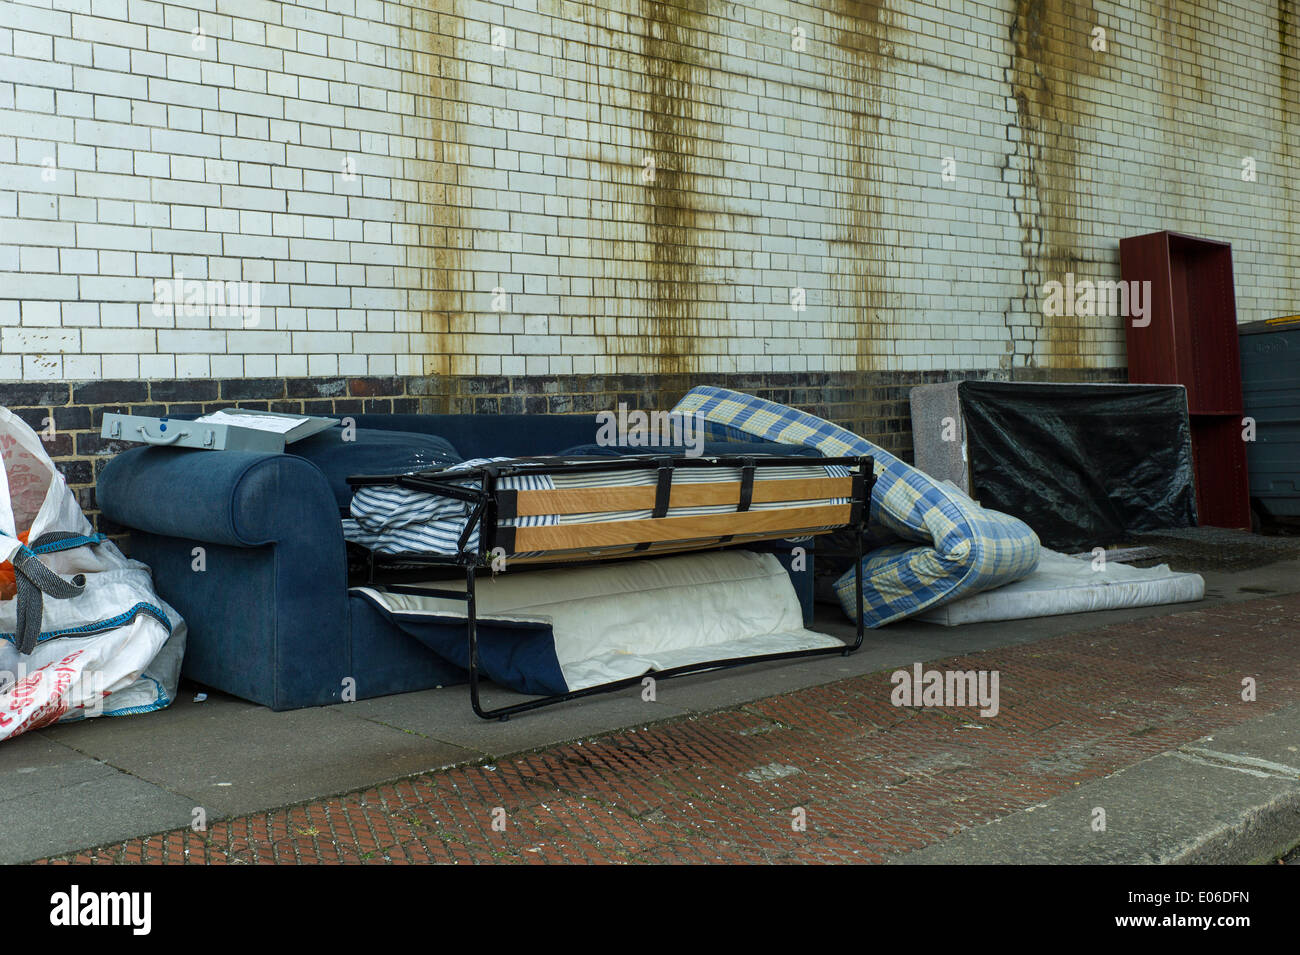 London, UK. 04th May, 2014. London Borough of Barnet, Golders Green NW11 thought of as an affluent area of London has a big problem with fly-tipping, and in particular the illegal dumping of beds and mattresses. © Rena Pearl/Alamy Live News Stock Photo